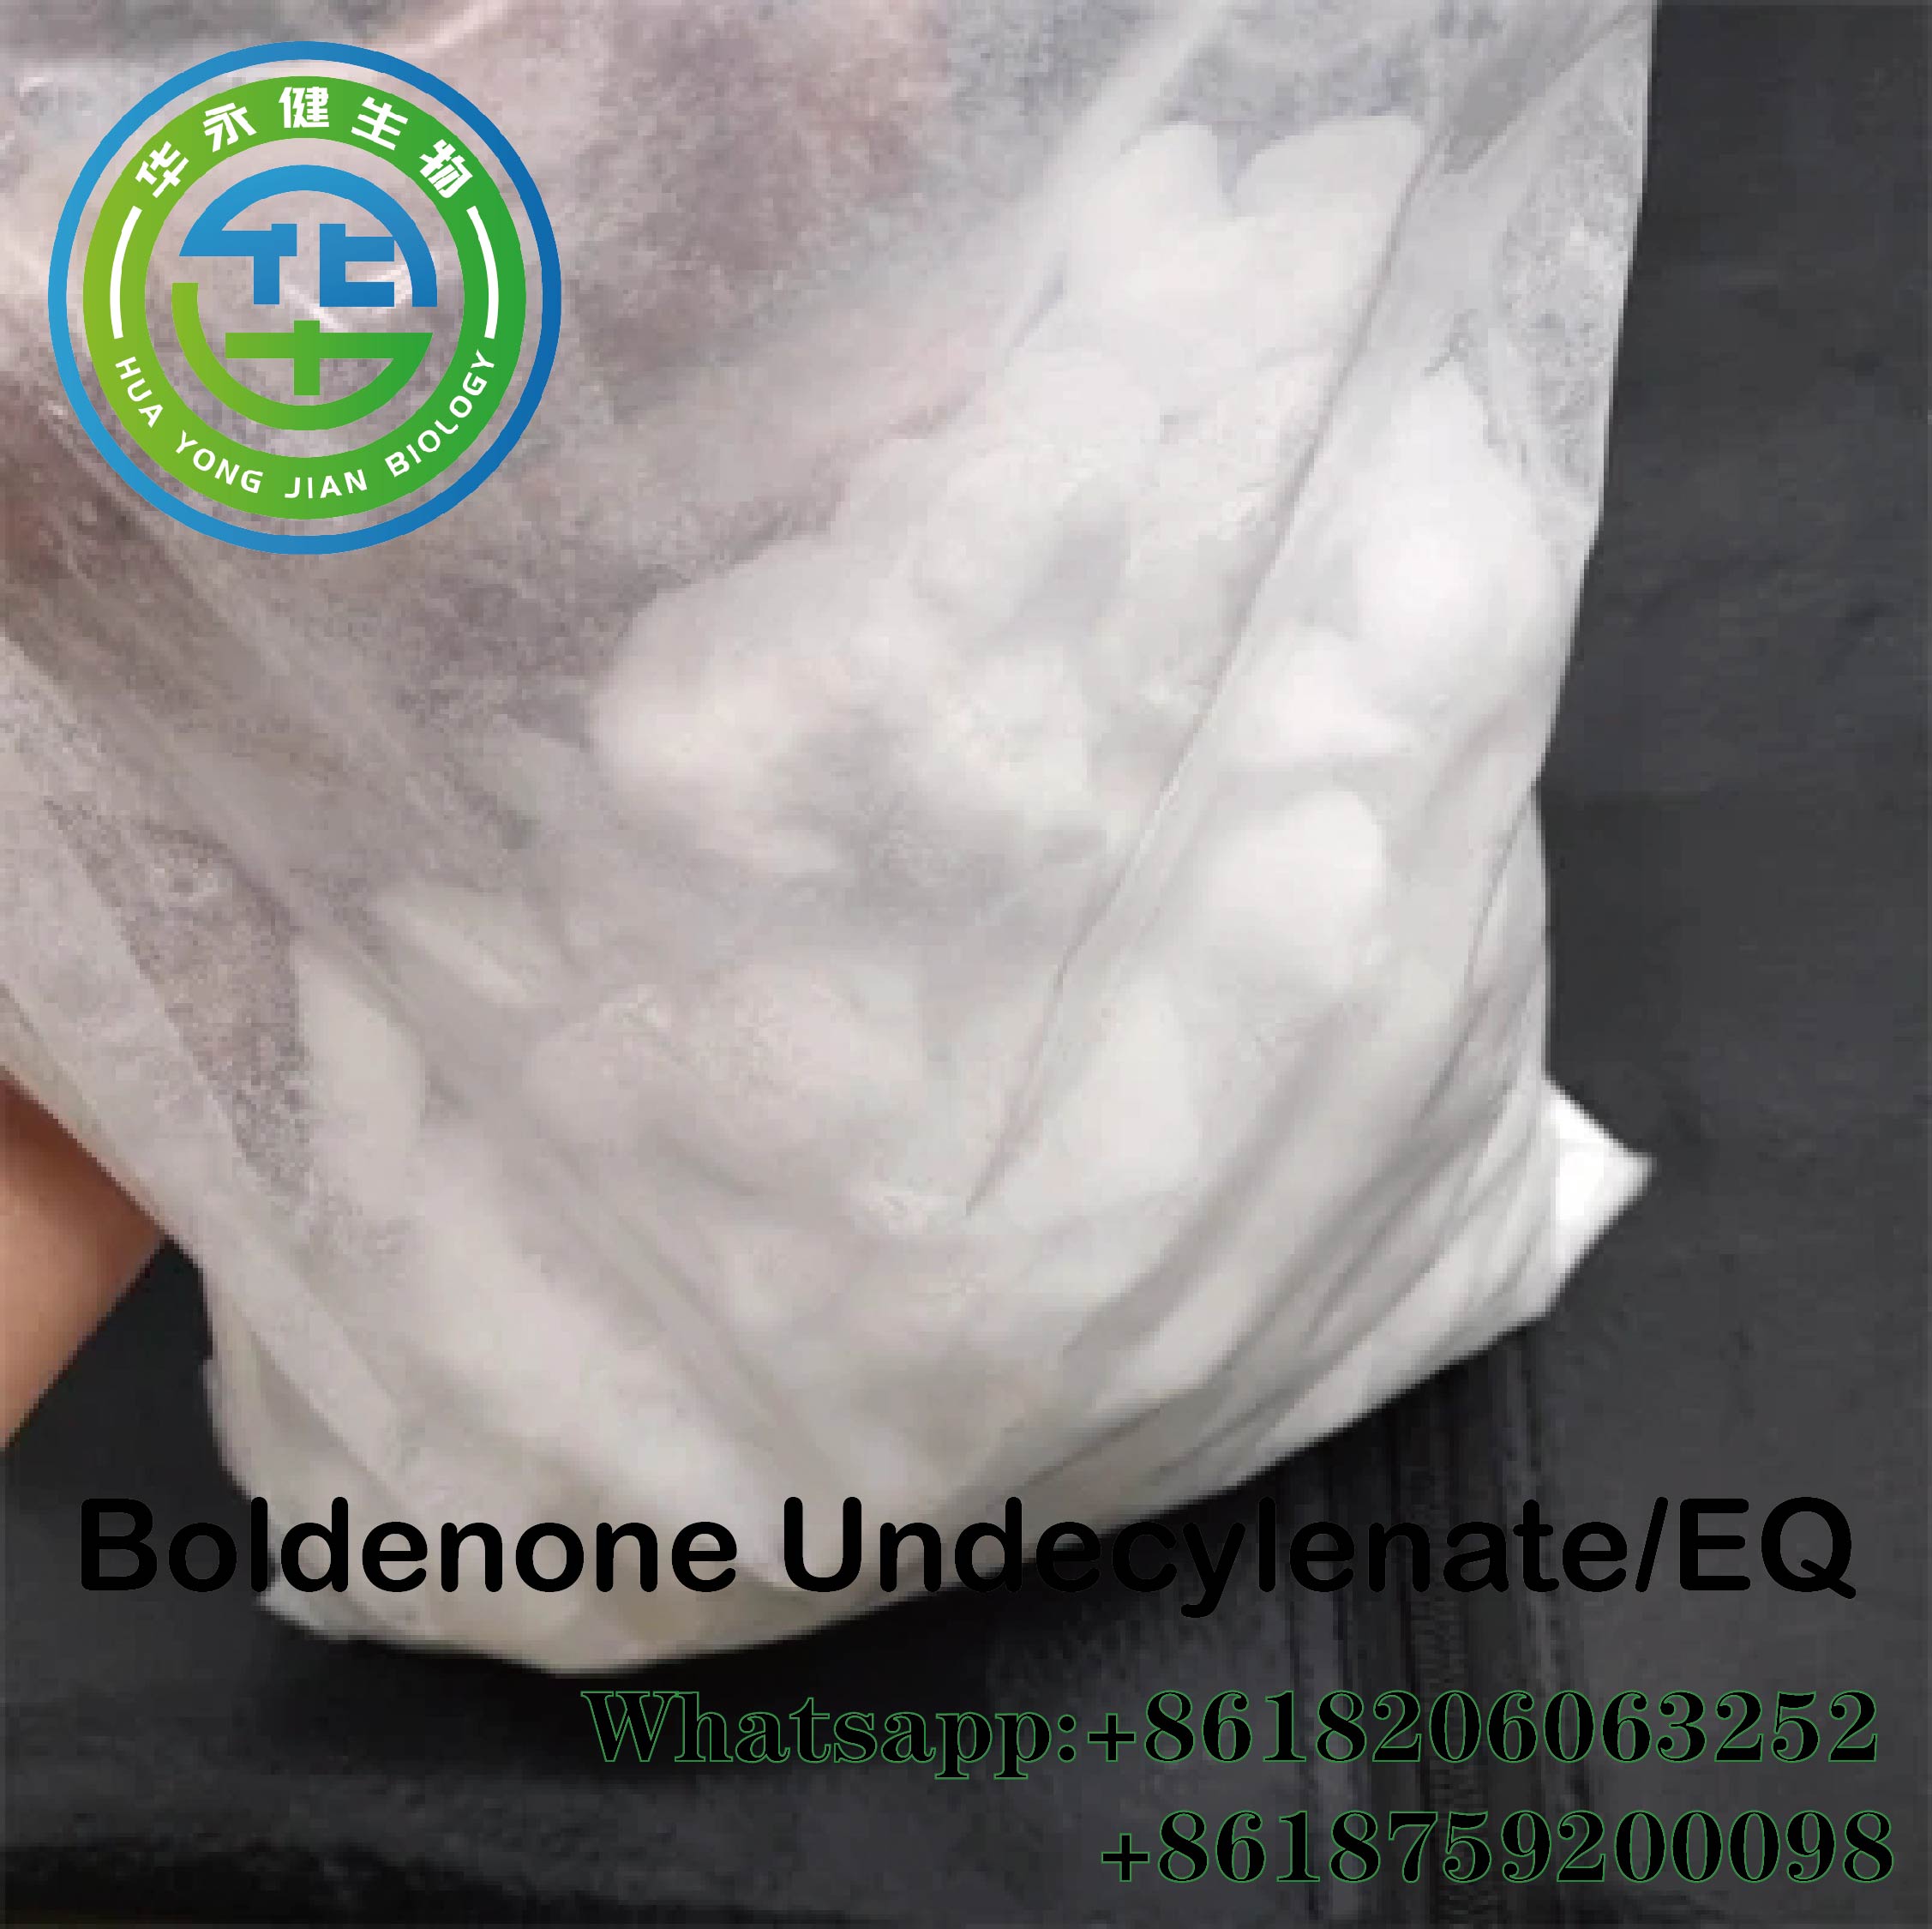 Natural weight loss powder Boldenone Undecylenate Equipoise Liquid 300mg/ml for Muscle Gaining Bodybuilding CasNO.13103-34-9